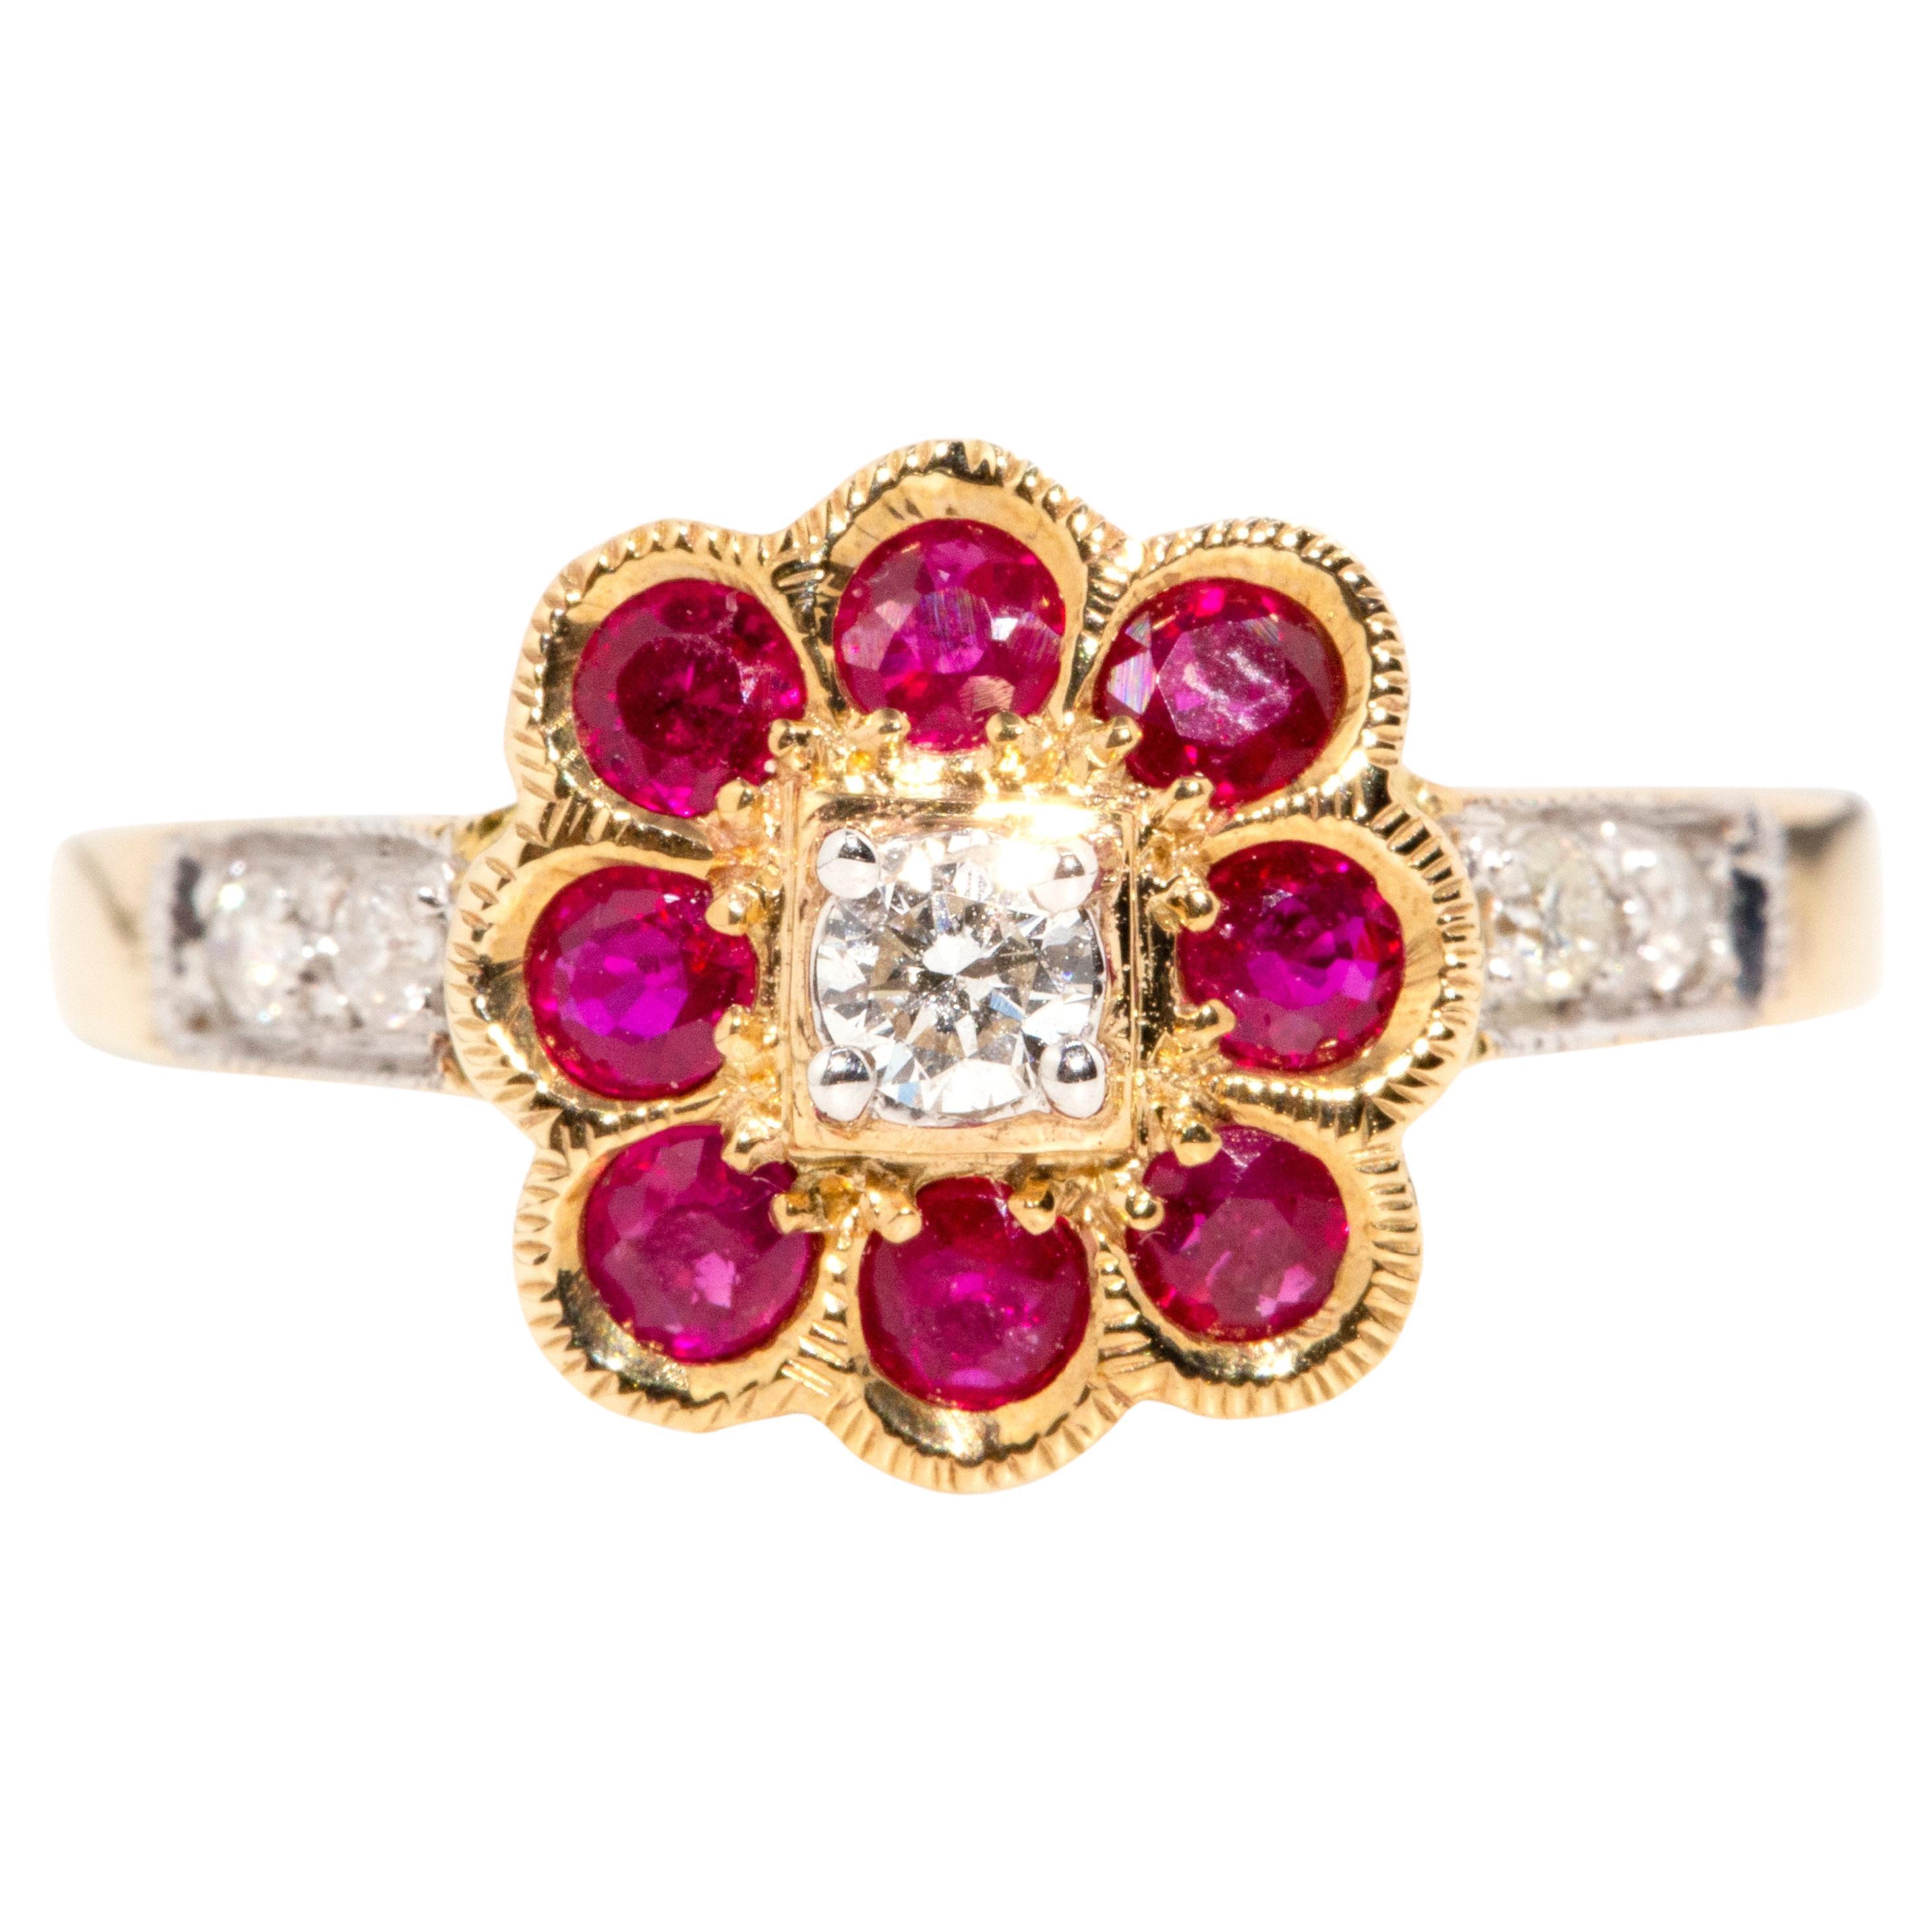 Vintage Inspired Bright Deep Red Ruby & Diamond Cluster Ring 9 Carat Yellow Gold